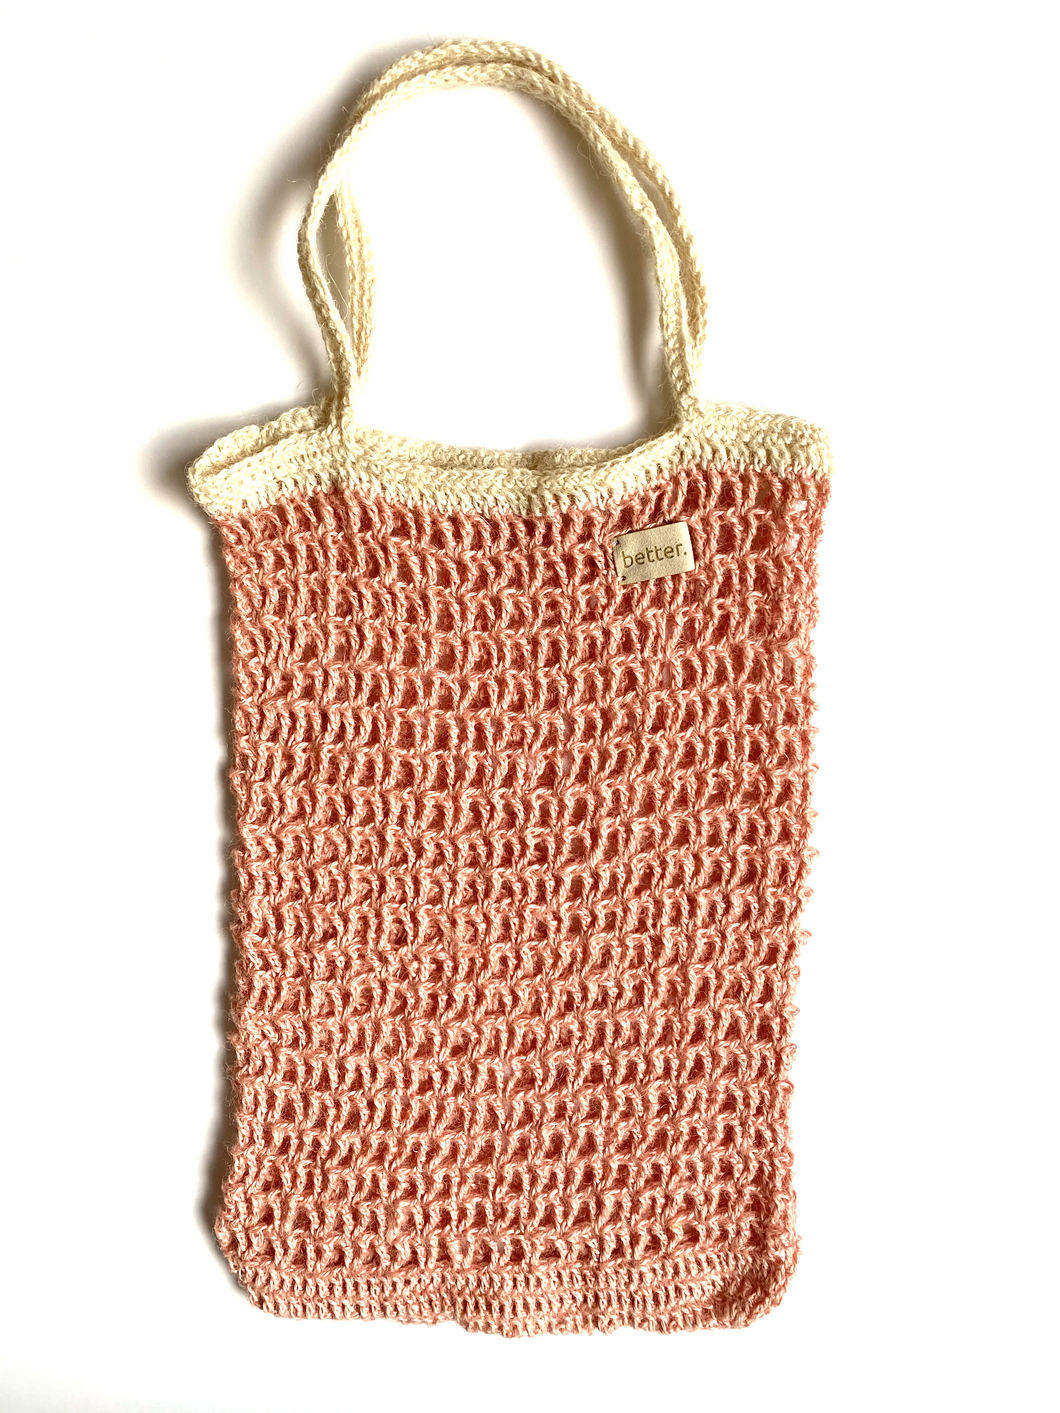 string bag - long handle - eight colour combinations